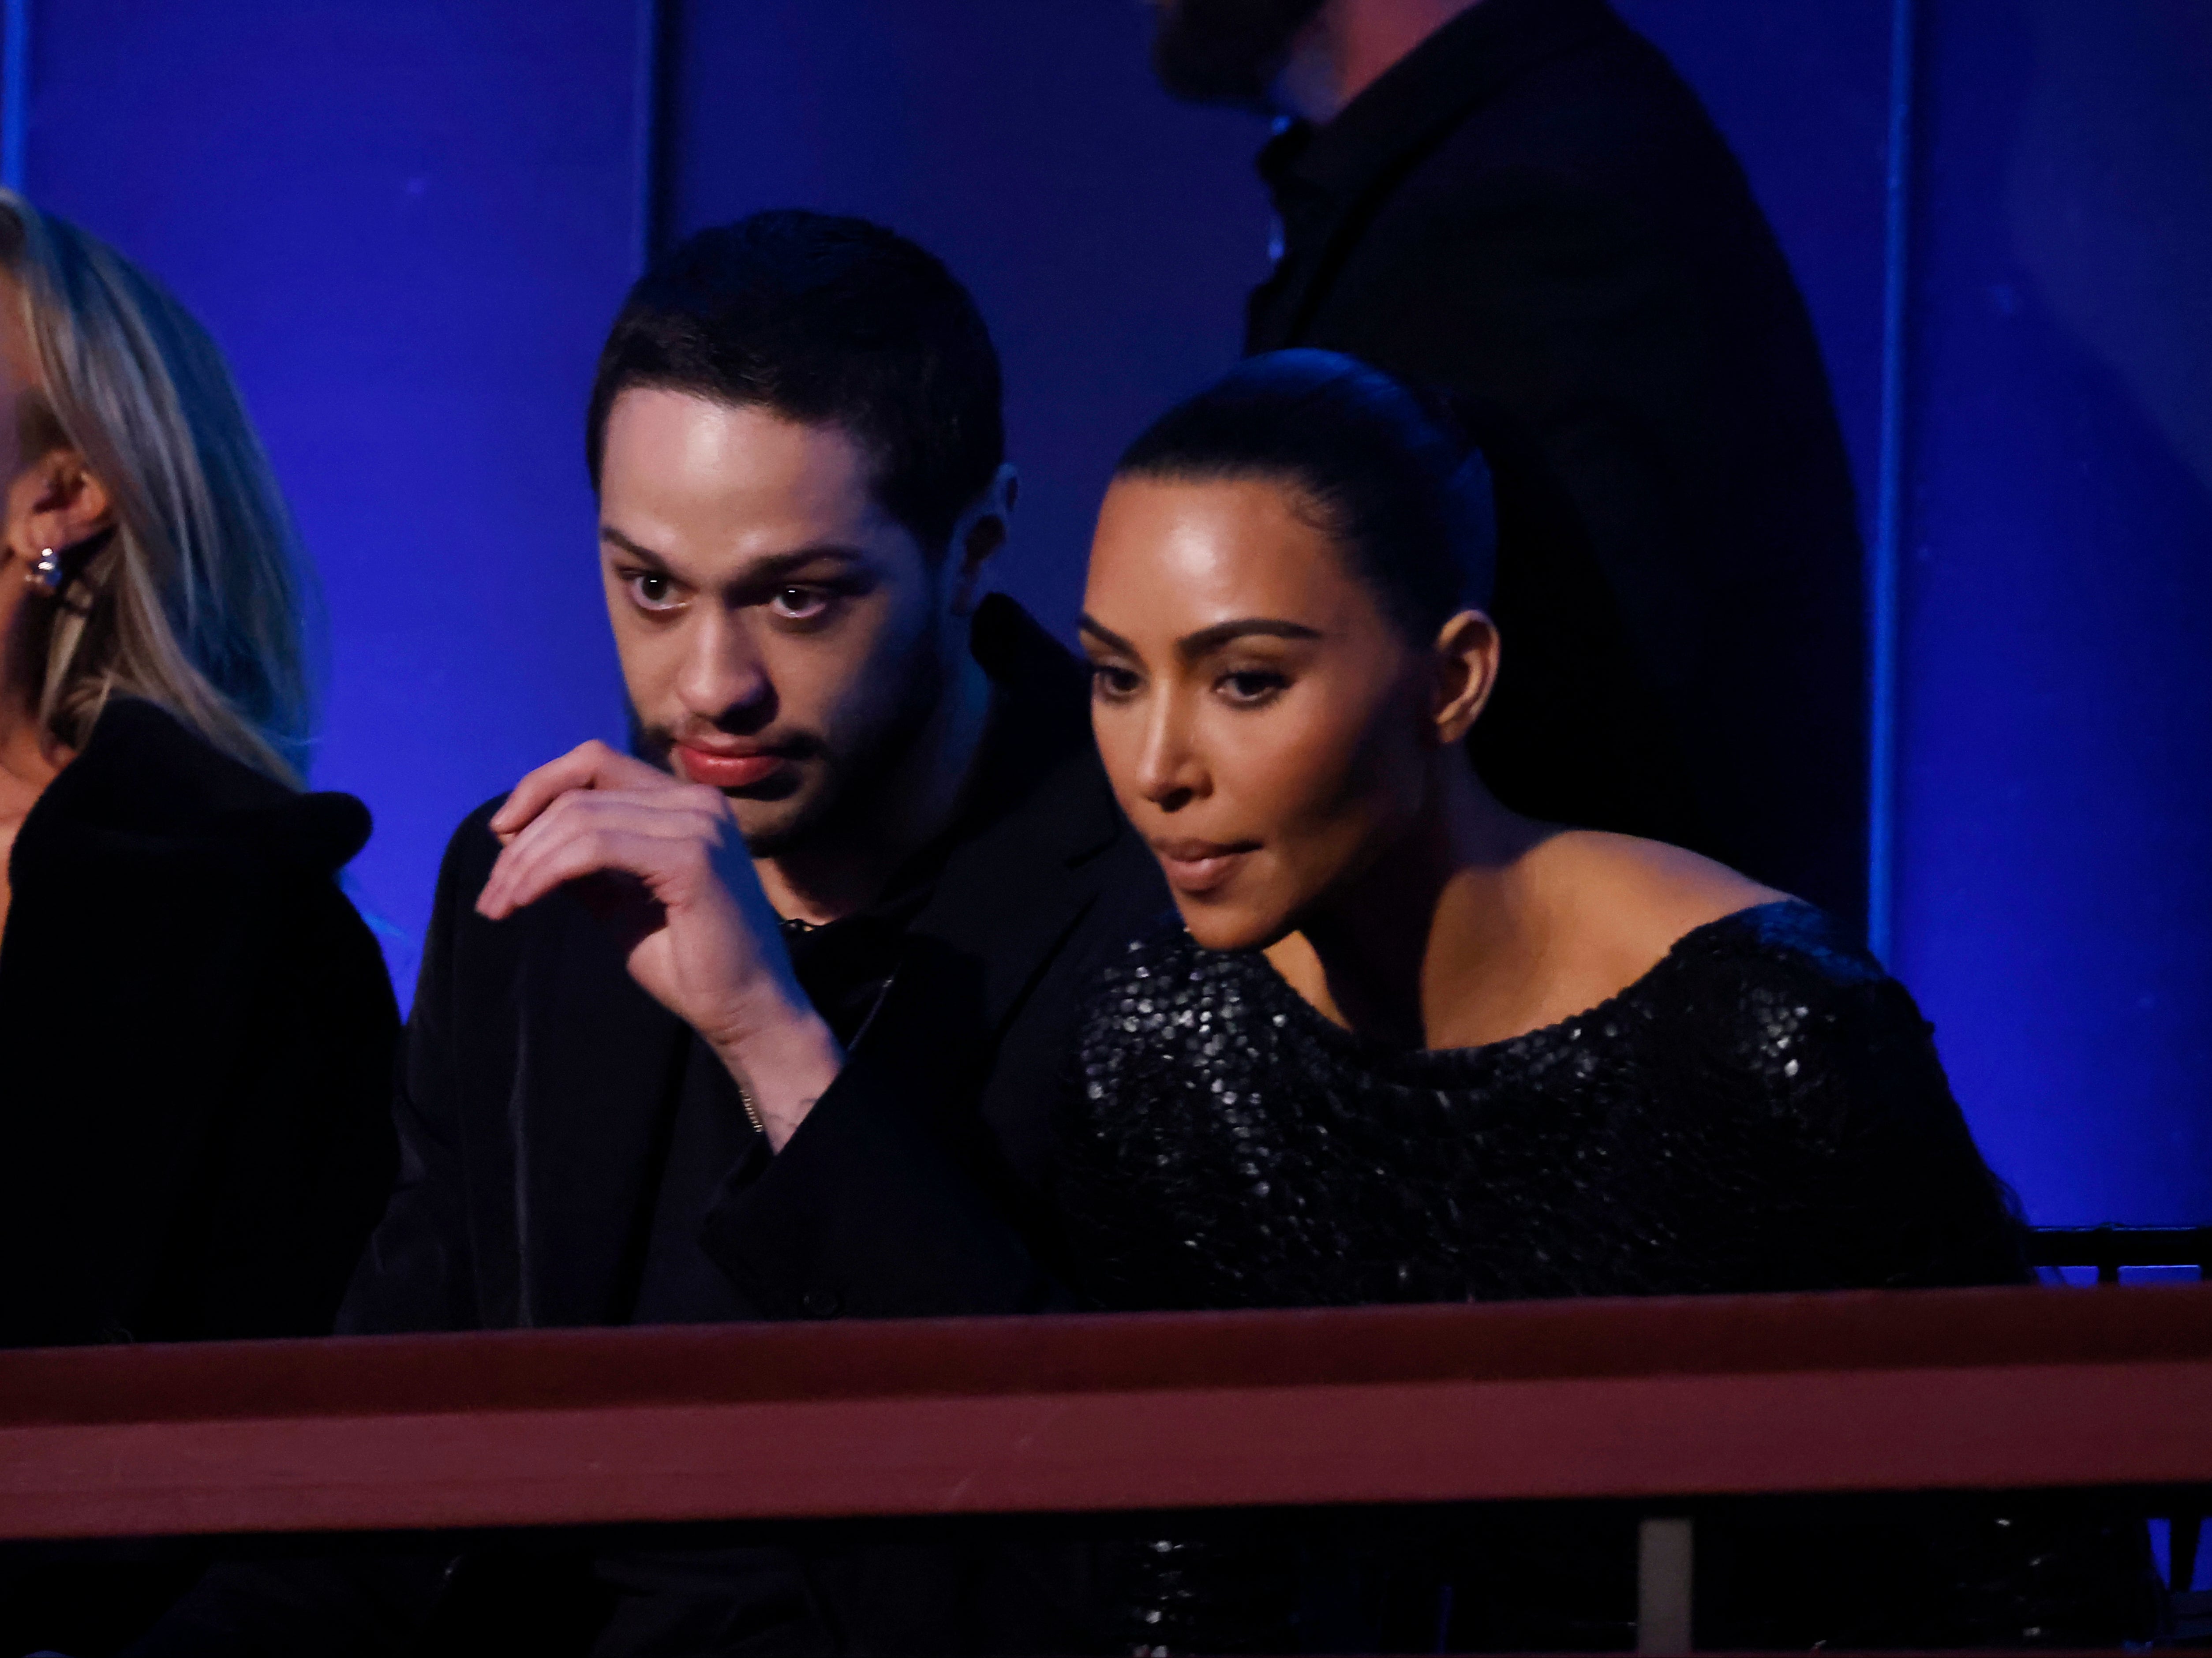 Pete Davidson and Kim Kardashian attend the 23rd Annual Mark Twain Prize For American Humor at The Kennedy Center